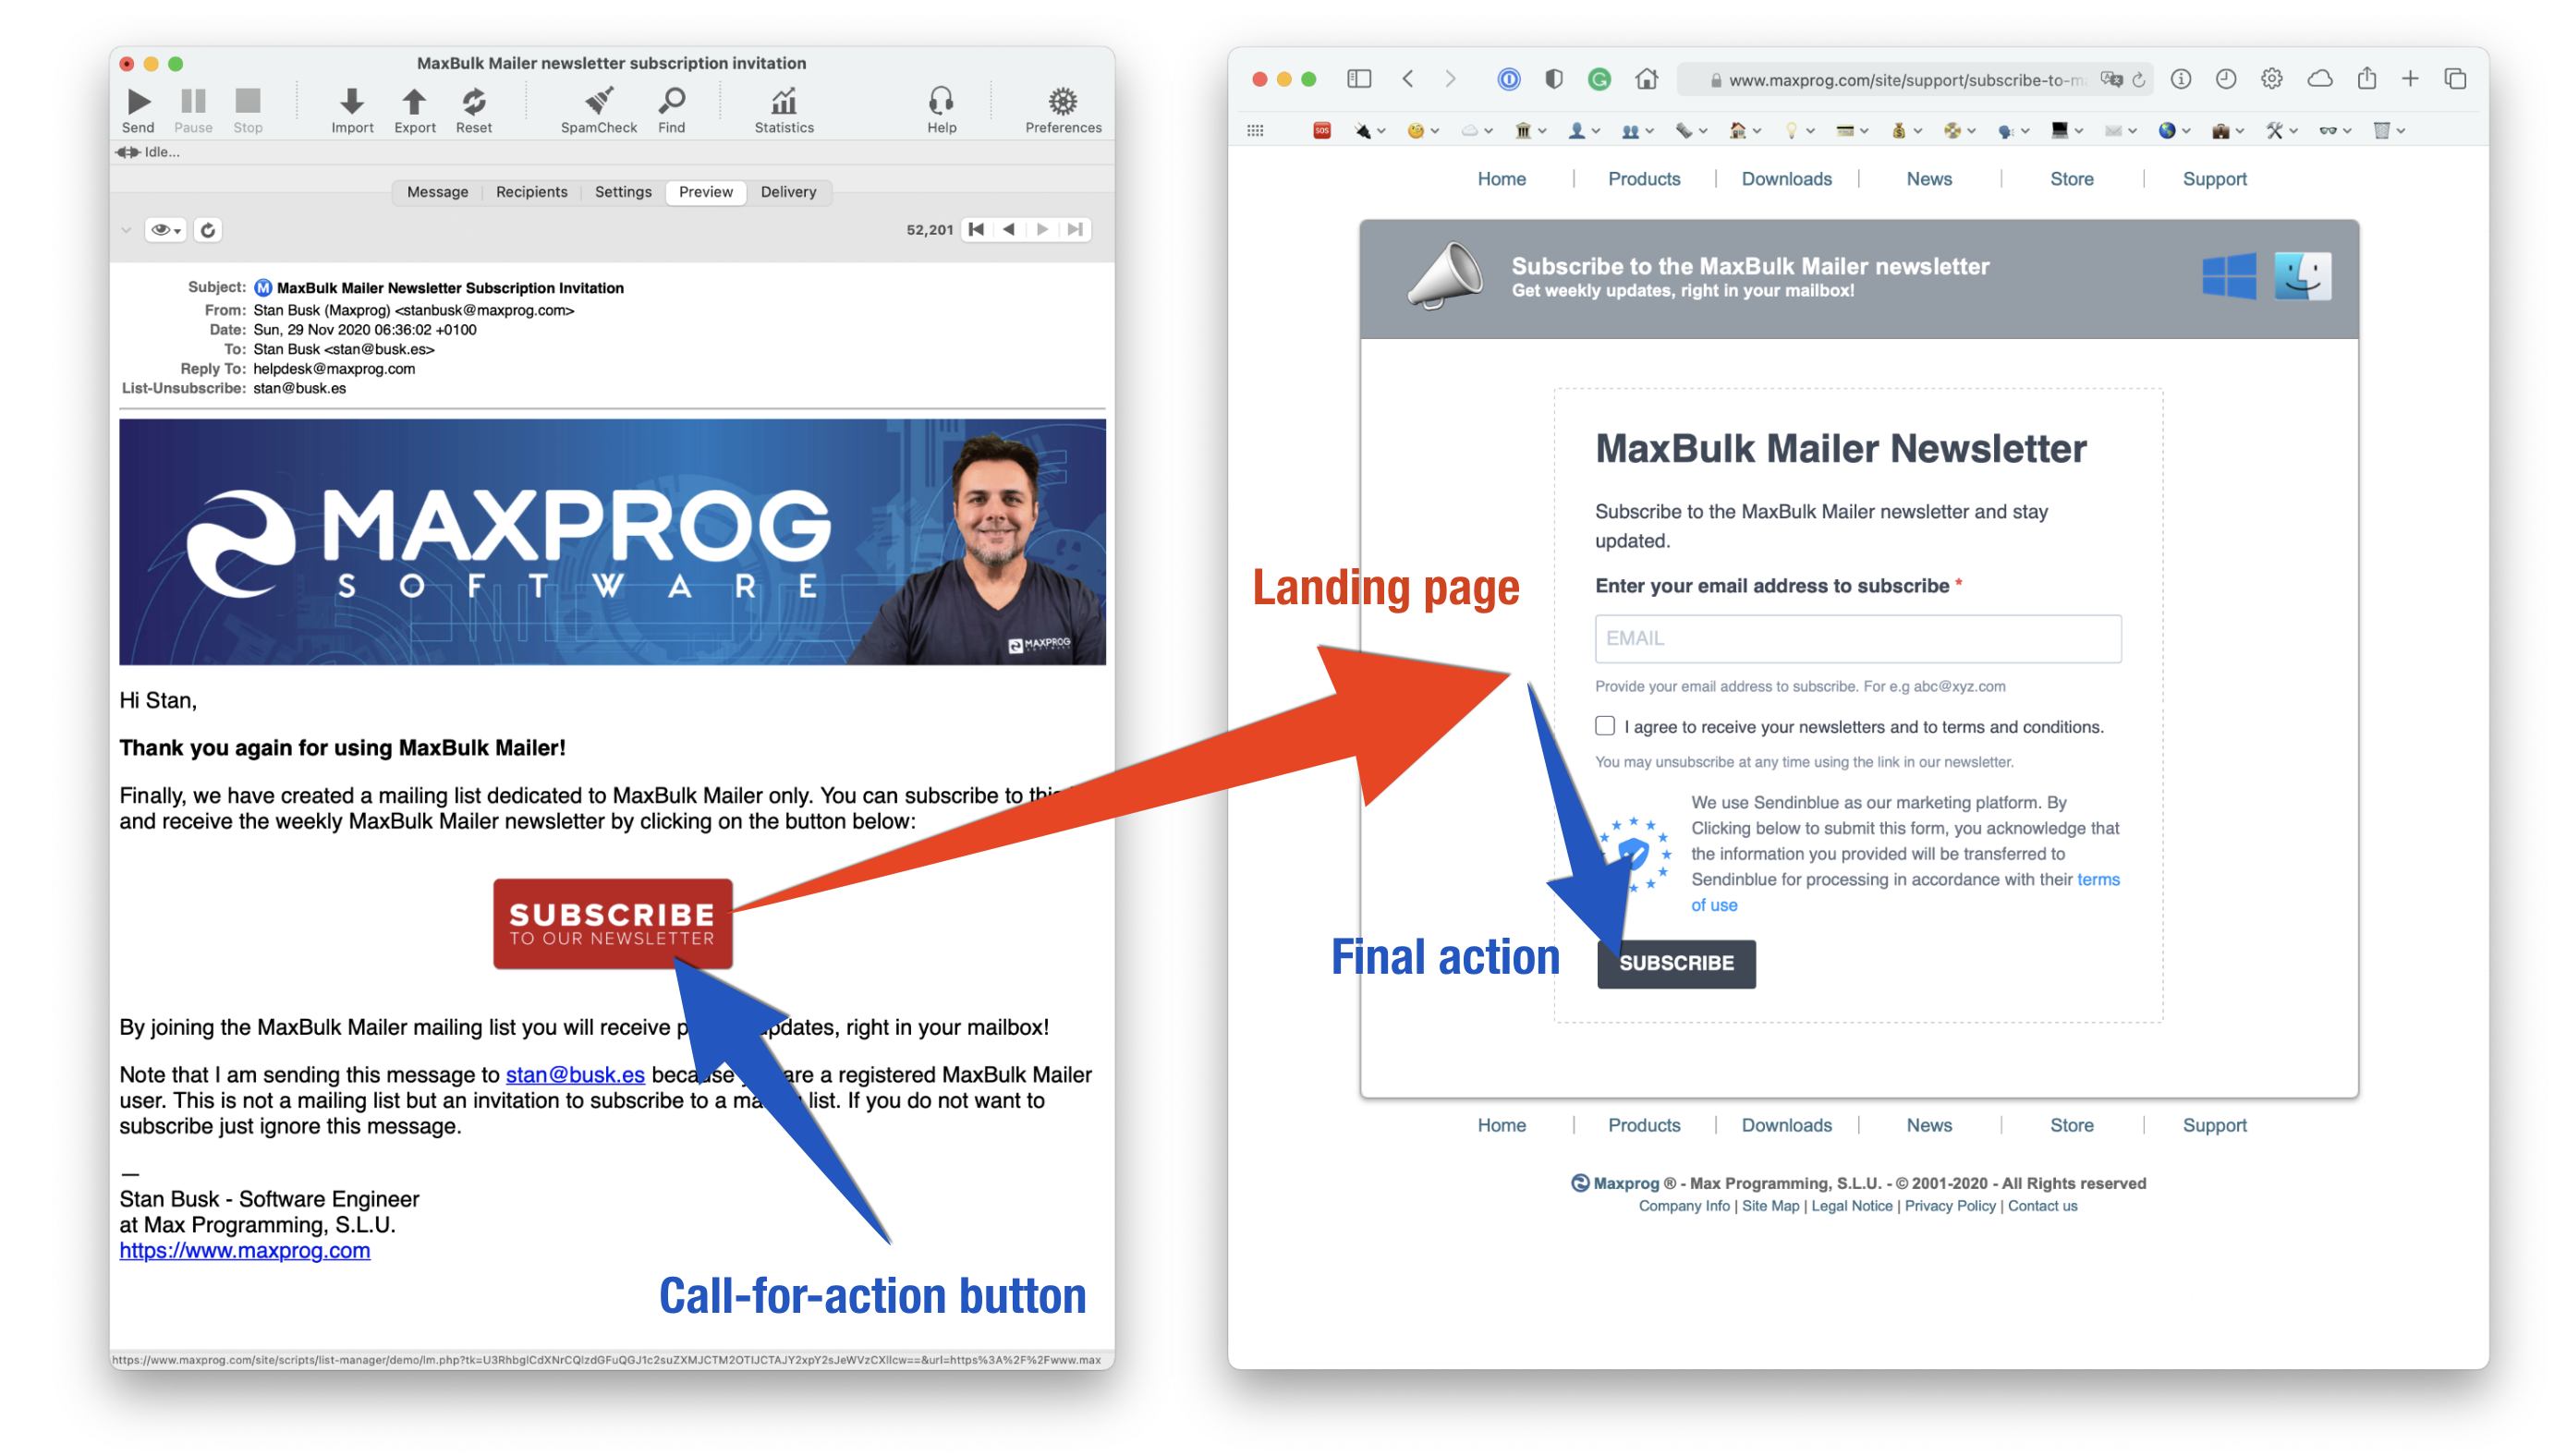 Landing page and call-for-action button